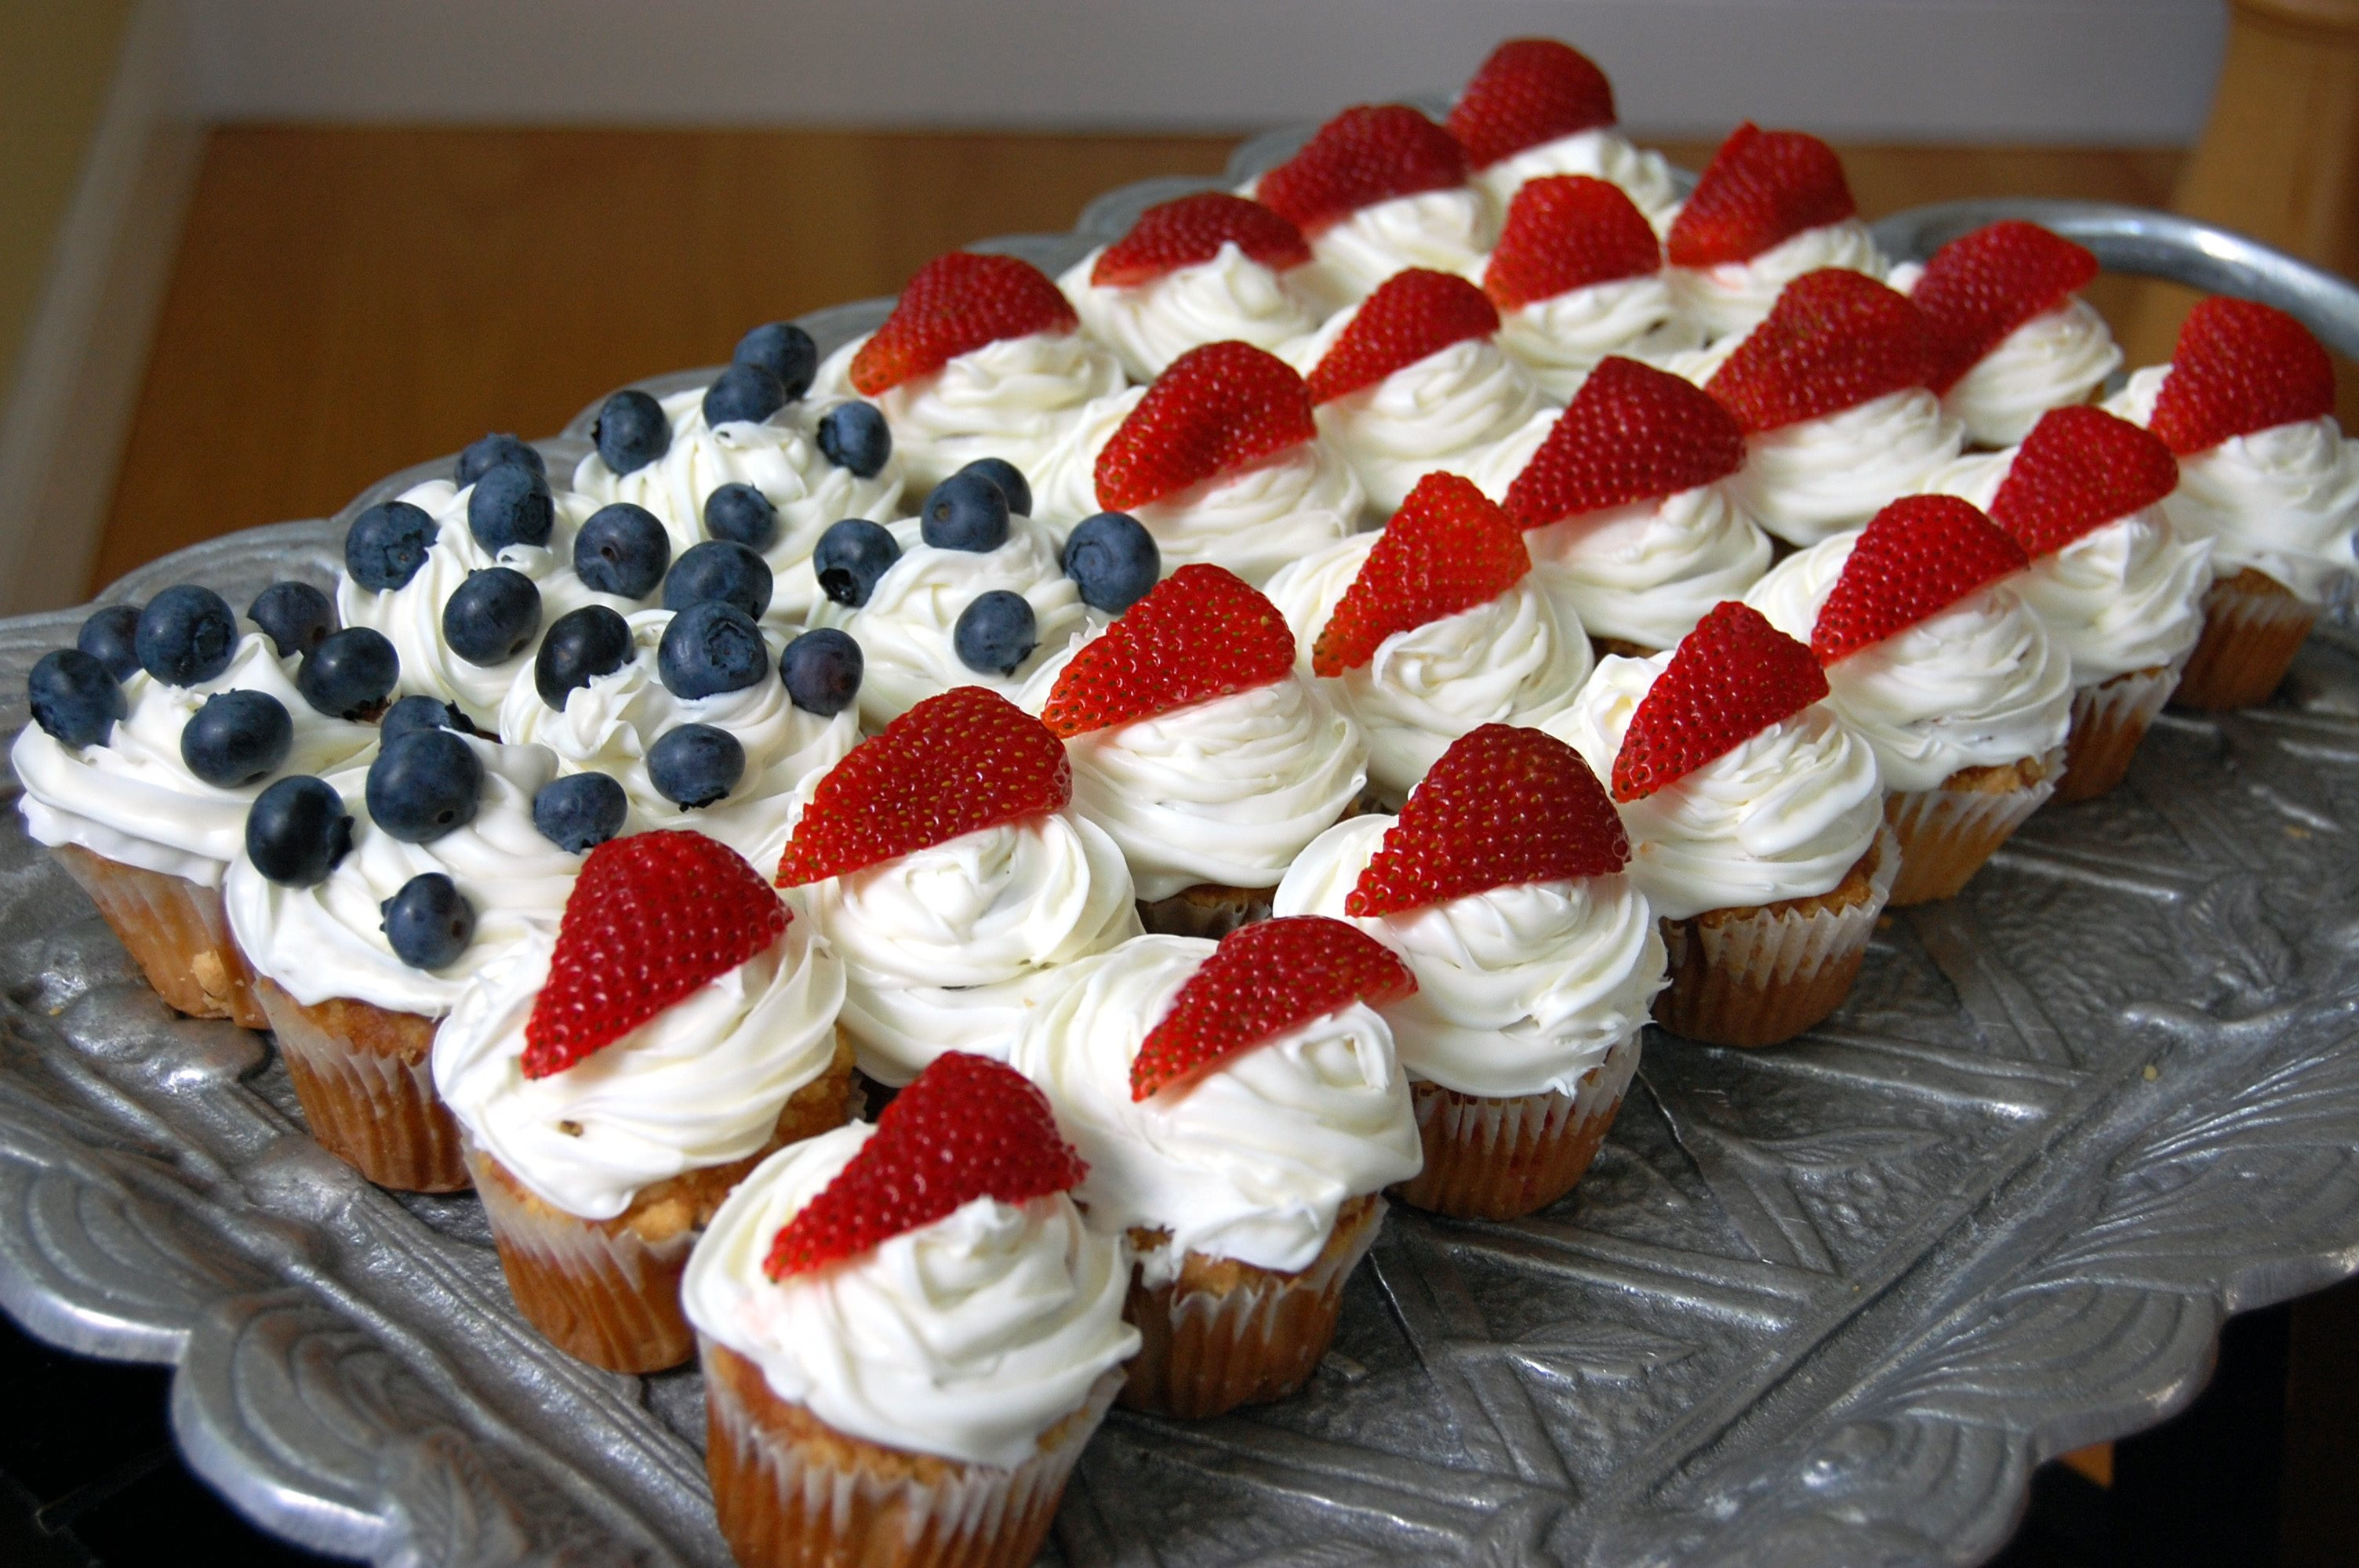 4Th Of July Dessert Recipes
 20 Lazy Yet Super Awesome 4th of July Ideas Gluten Free